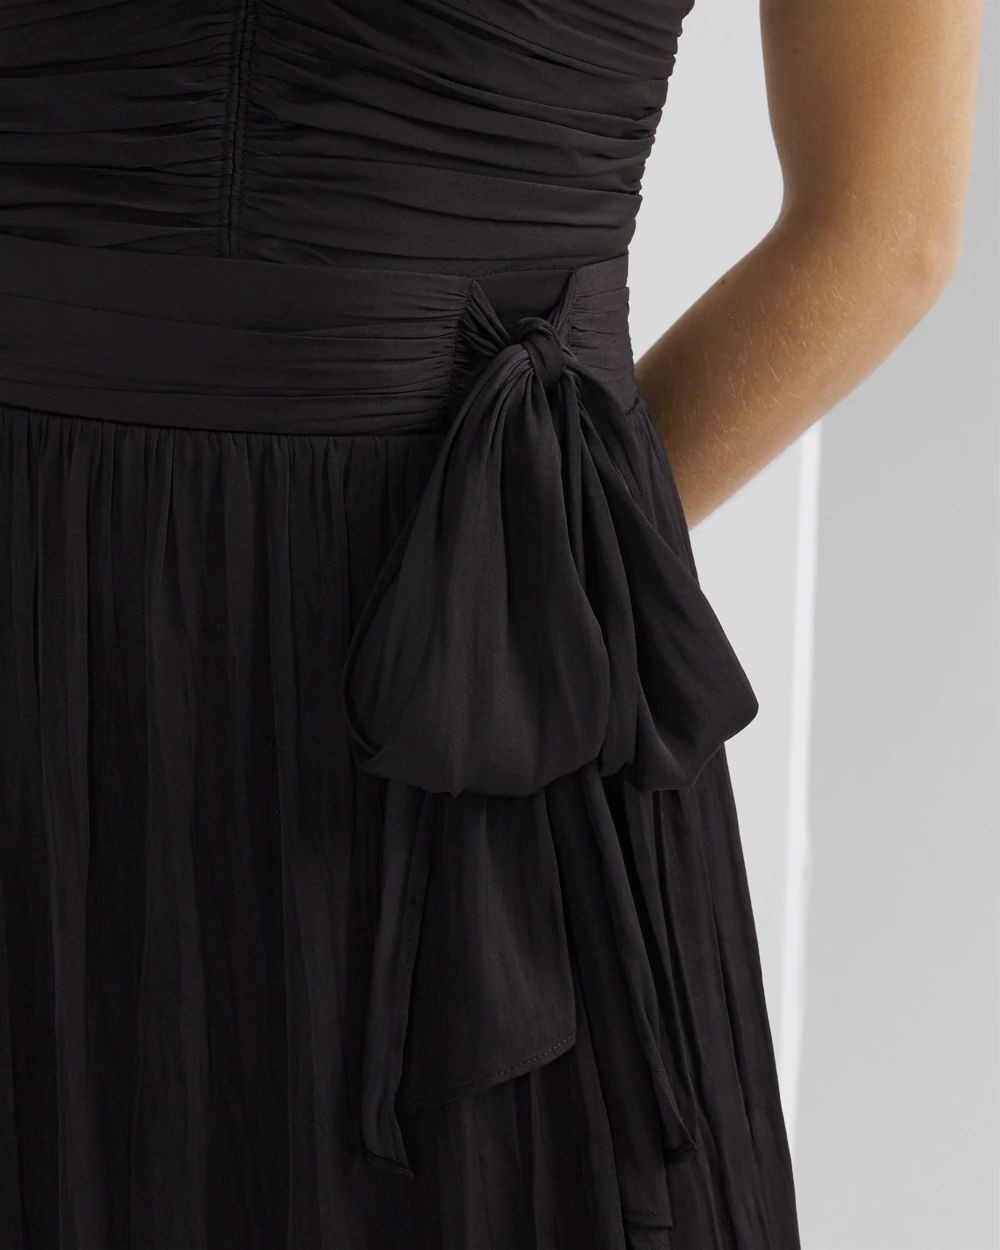 Strapless Pleated Tie-Waist Dress click to view larger image.